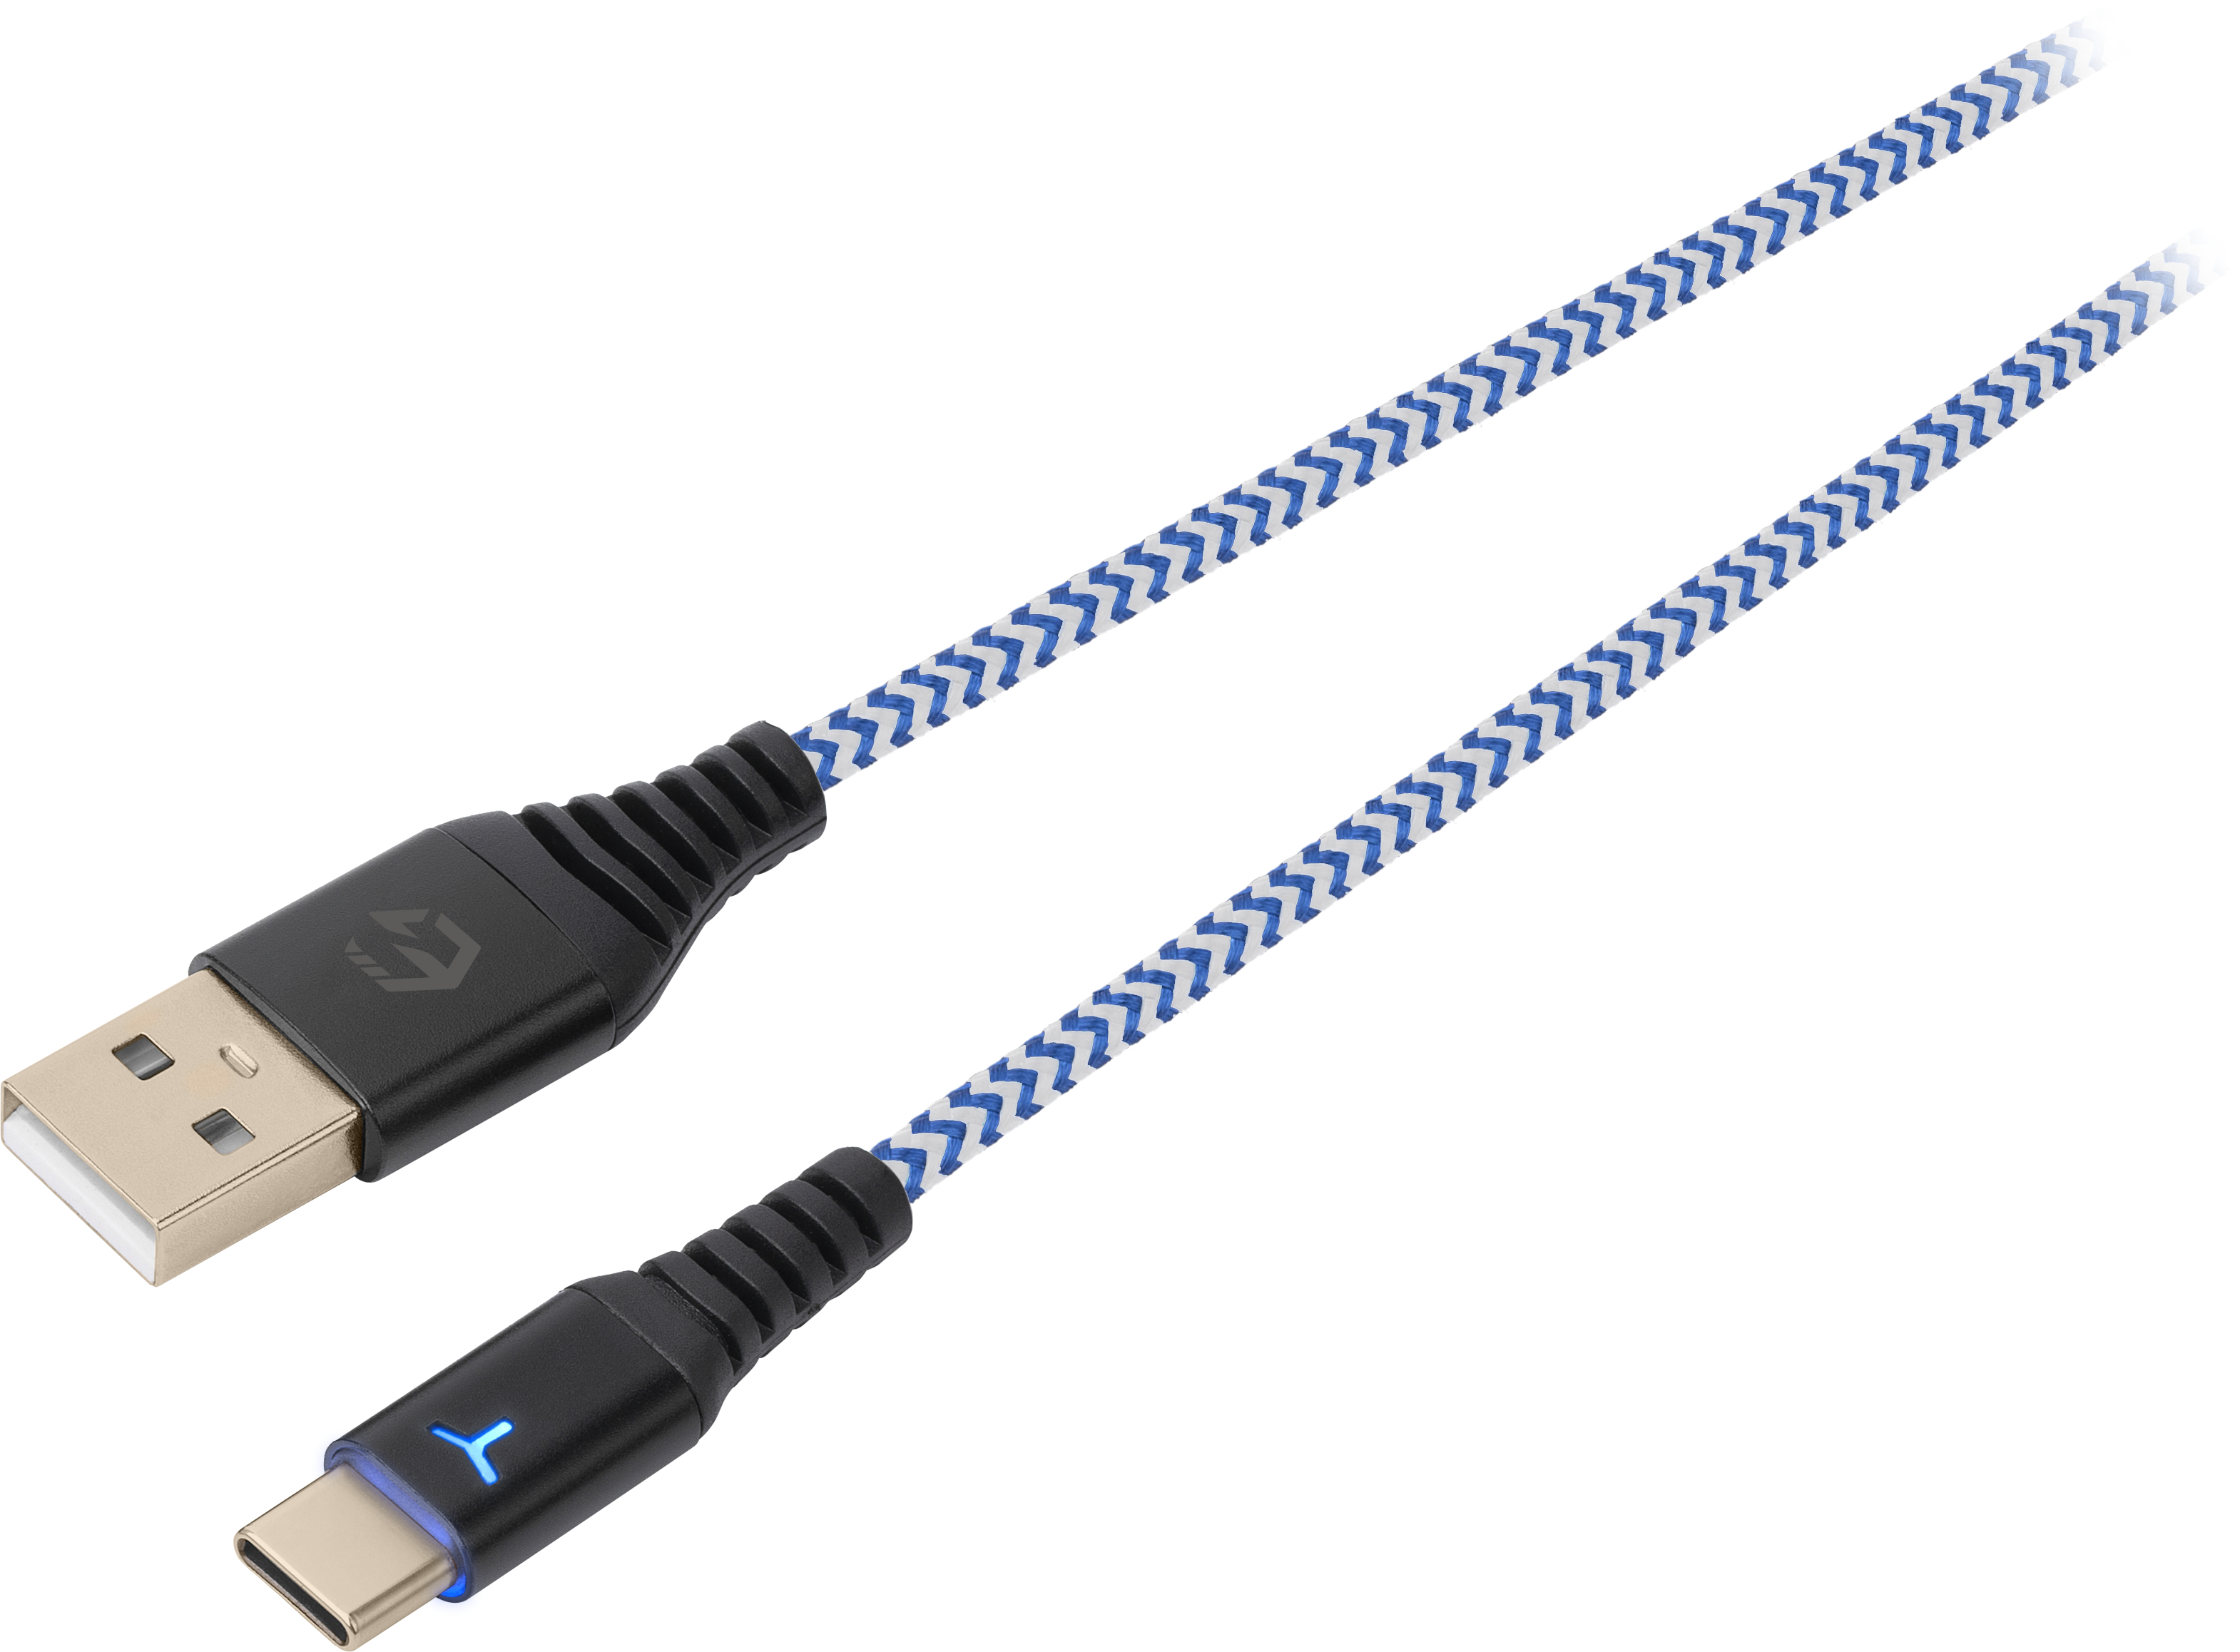 EGOGEAR Charging Cable Type-C 3m SCH10-P5-WH braided, PS5, White,Blue braided, PS5, White,Blue